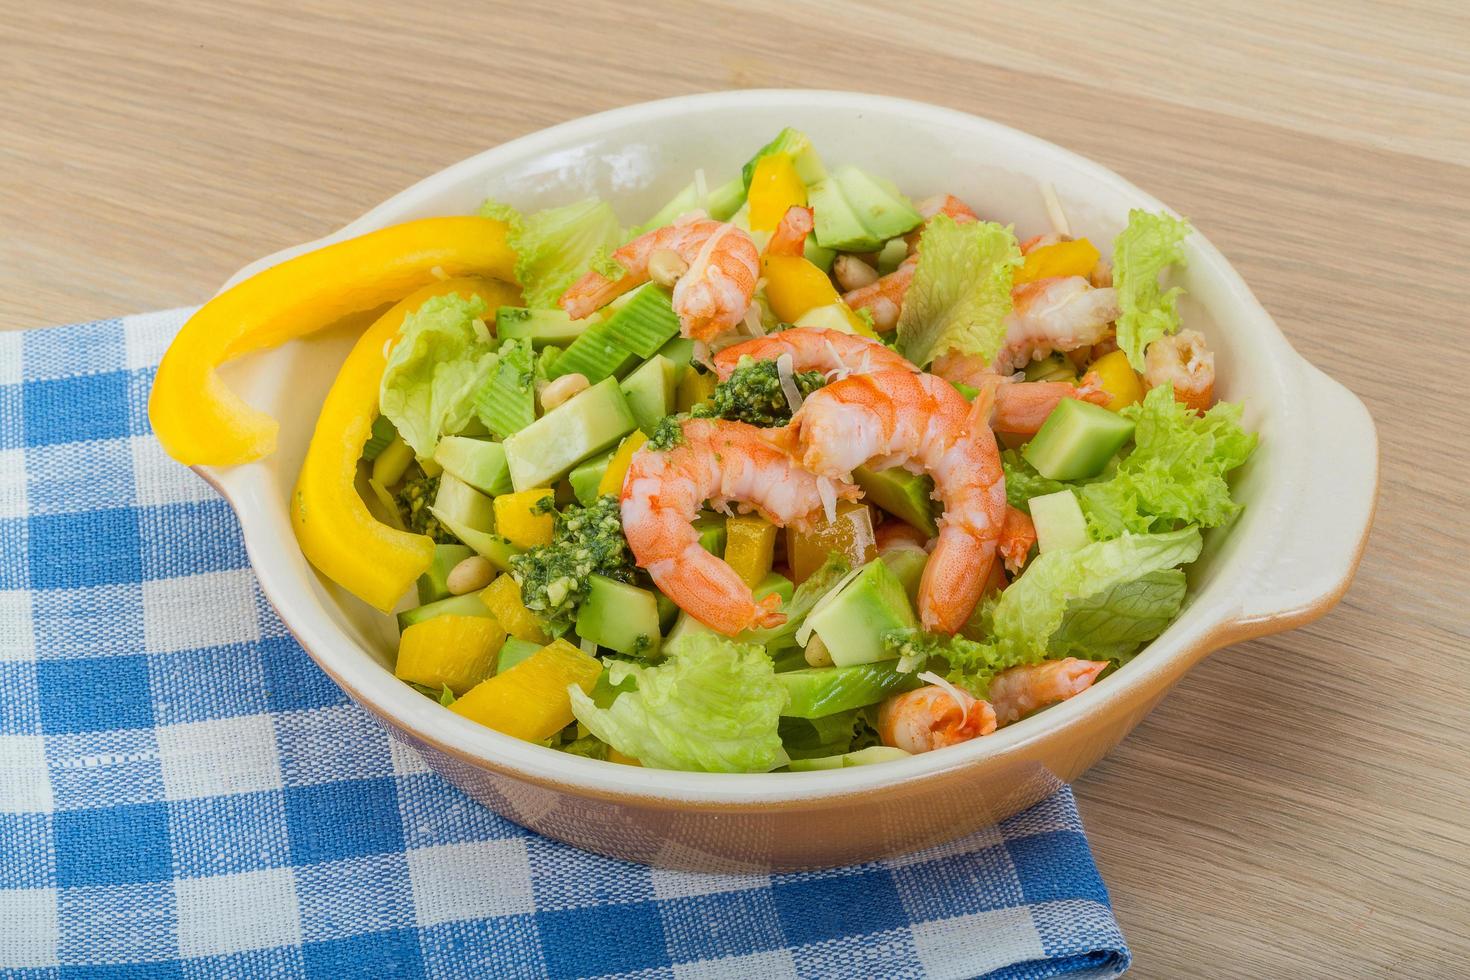 Salad with shrimps and avocado photo